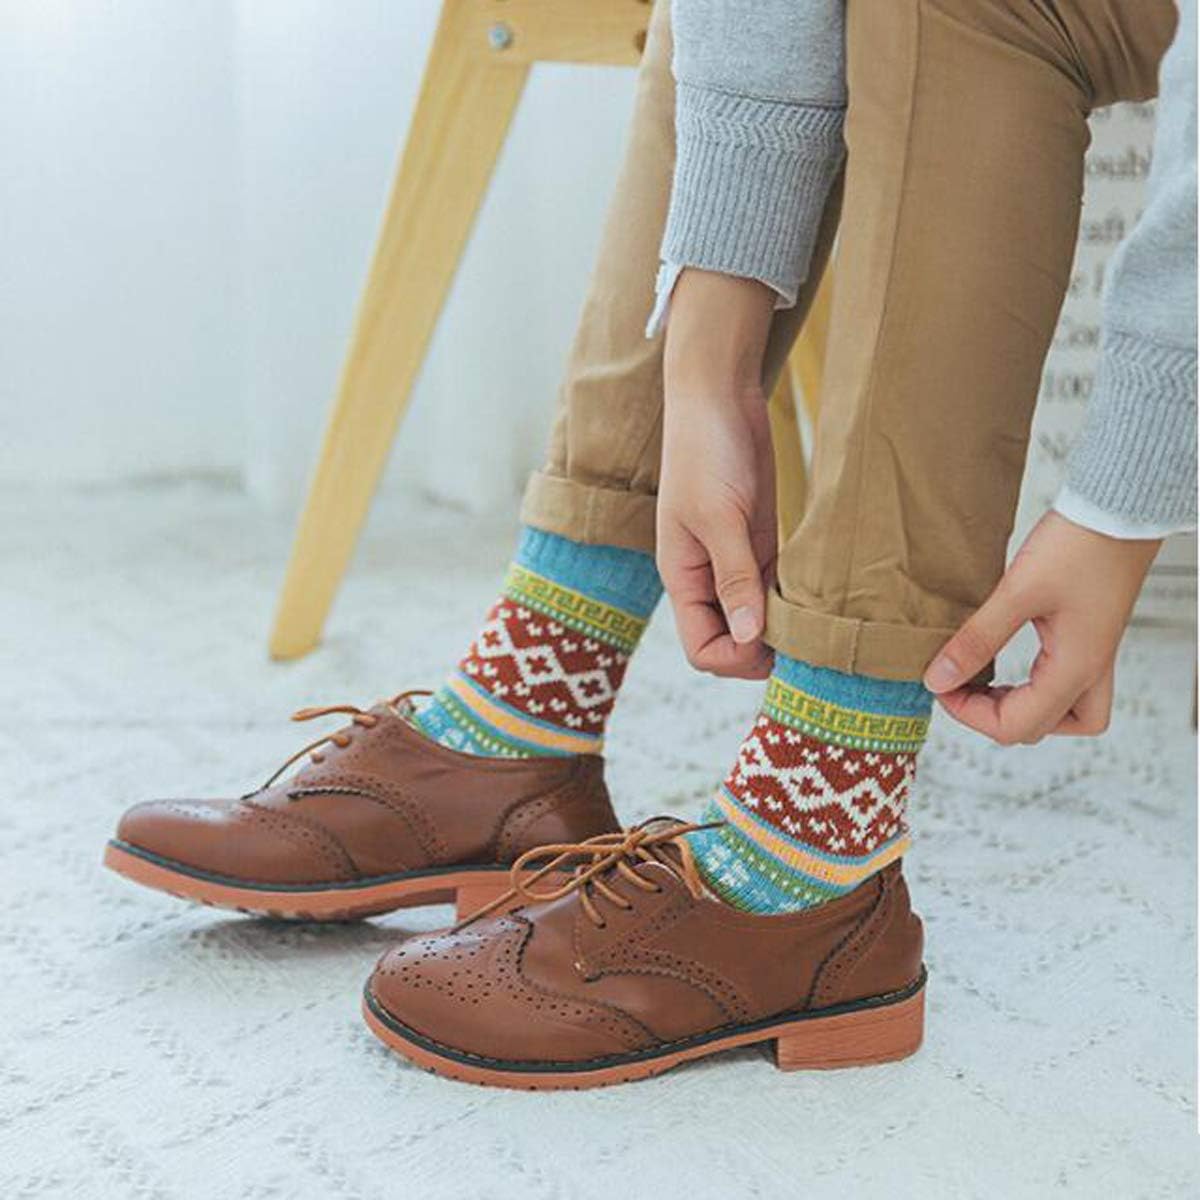 YZKKE 5Pack Womens Vintage Winter Soft Warm Thick Cold Knit Wool Crew Socks, Multicolor, free size